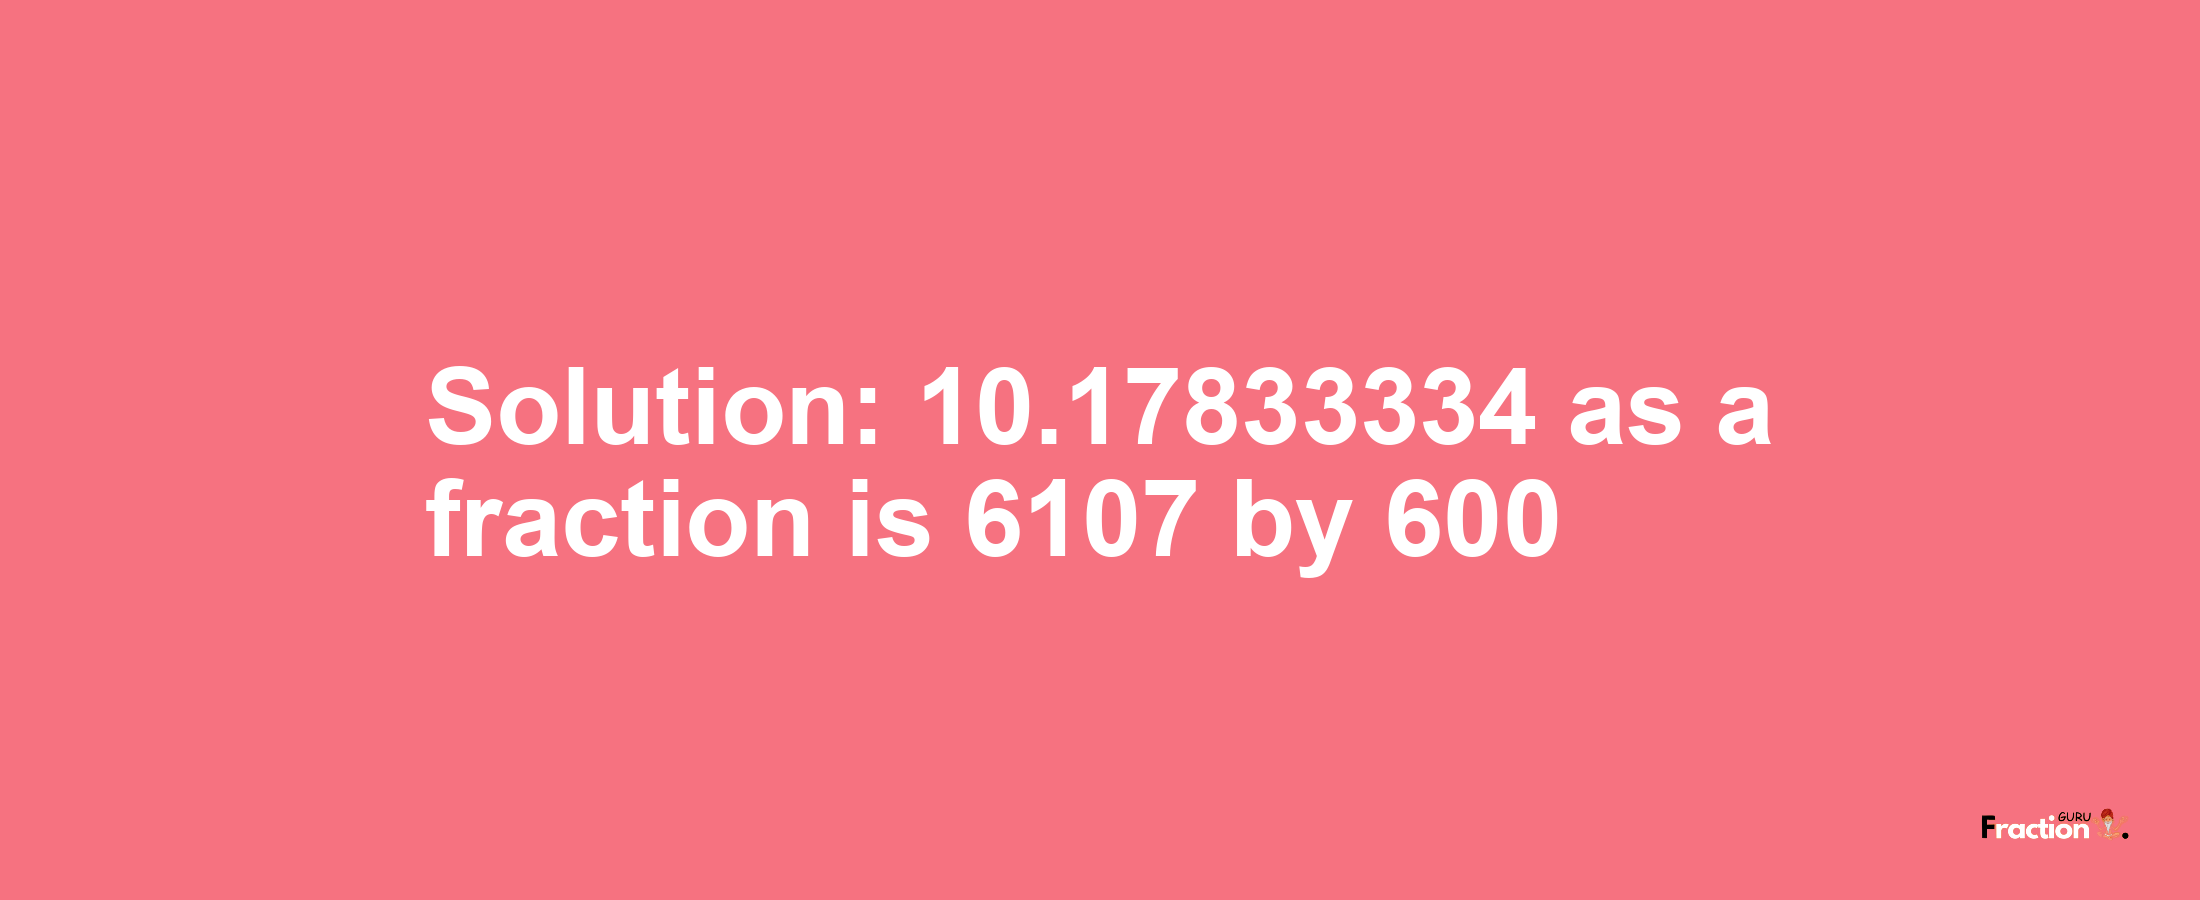 Solution:10.17833334 as a fraction is 6107/600